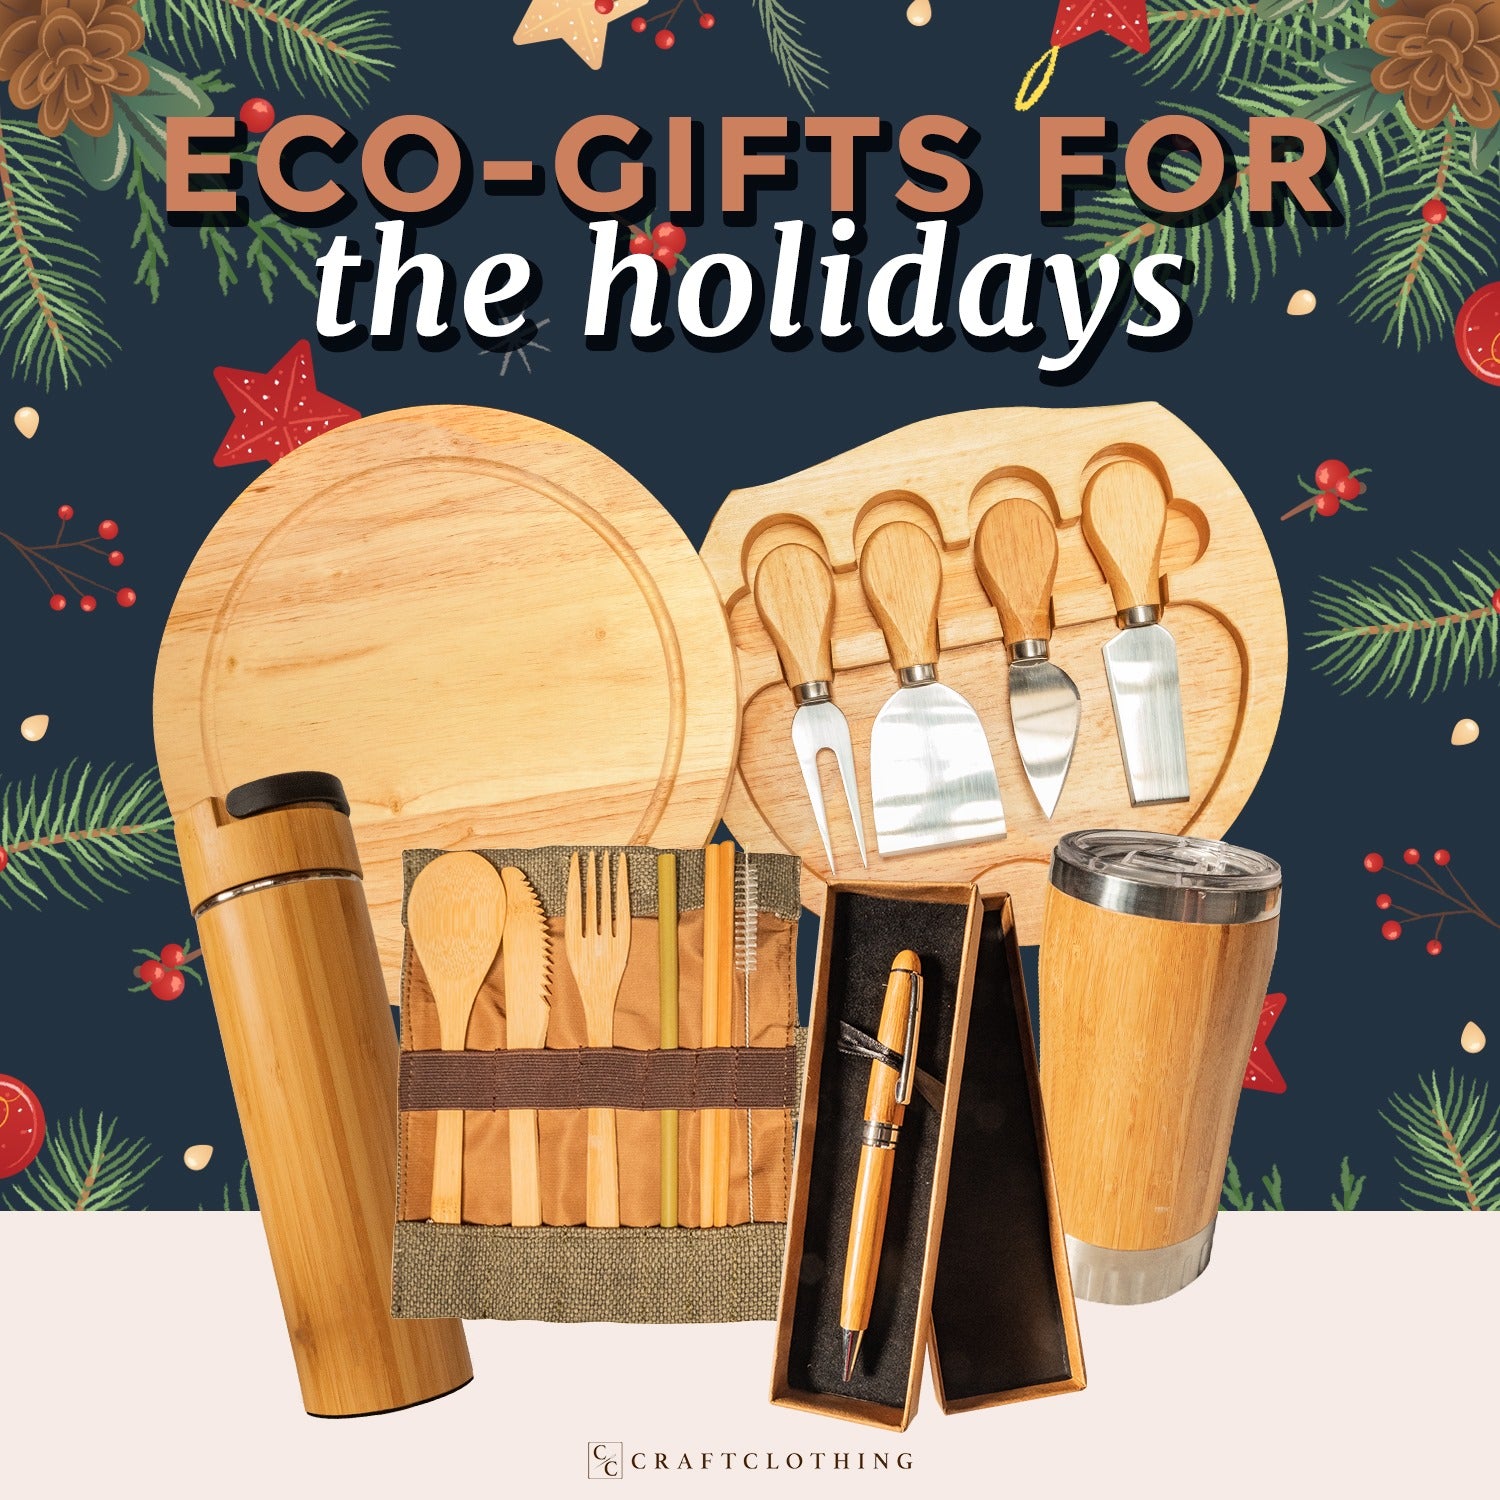 ECO-GIFTS FOR the holidays